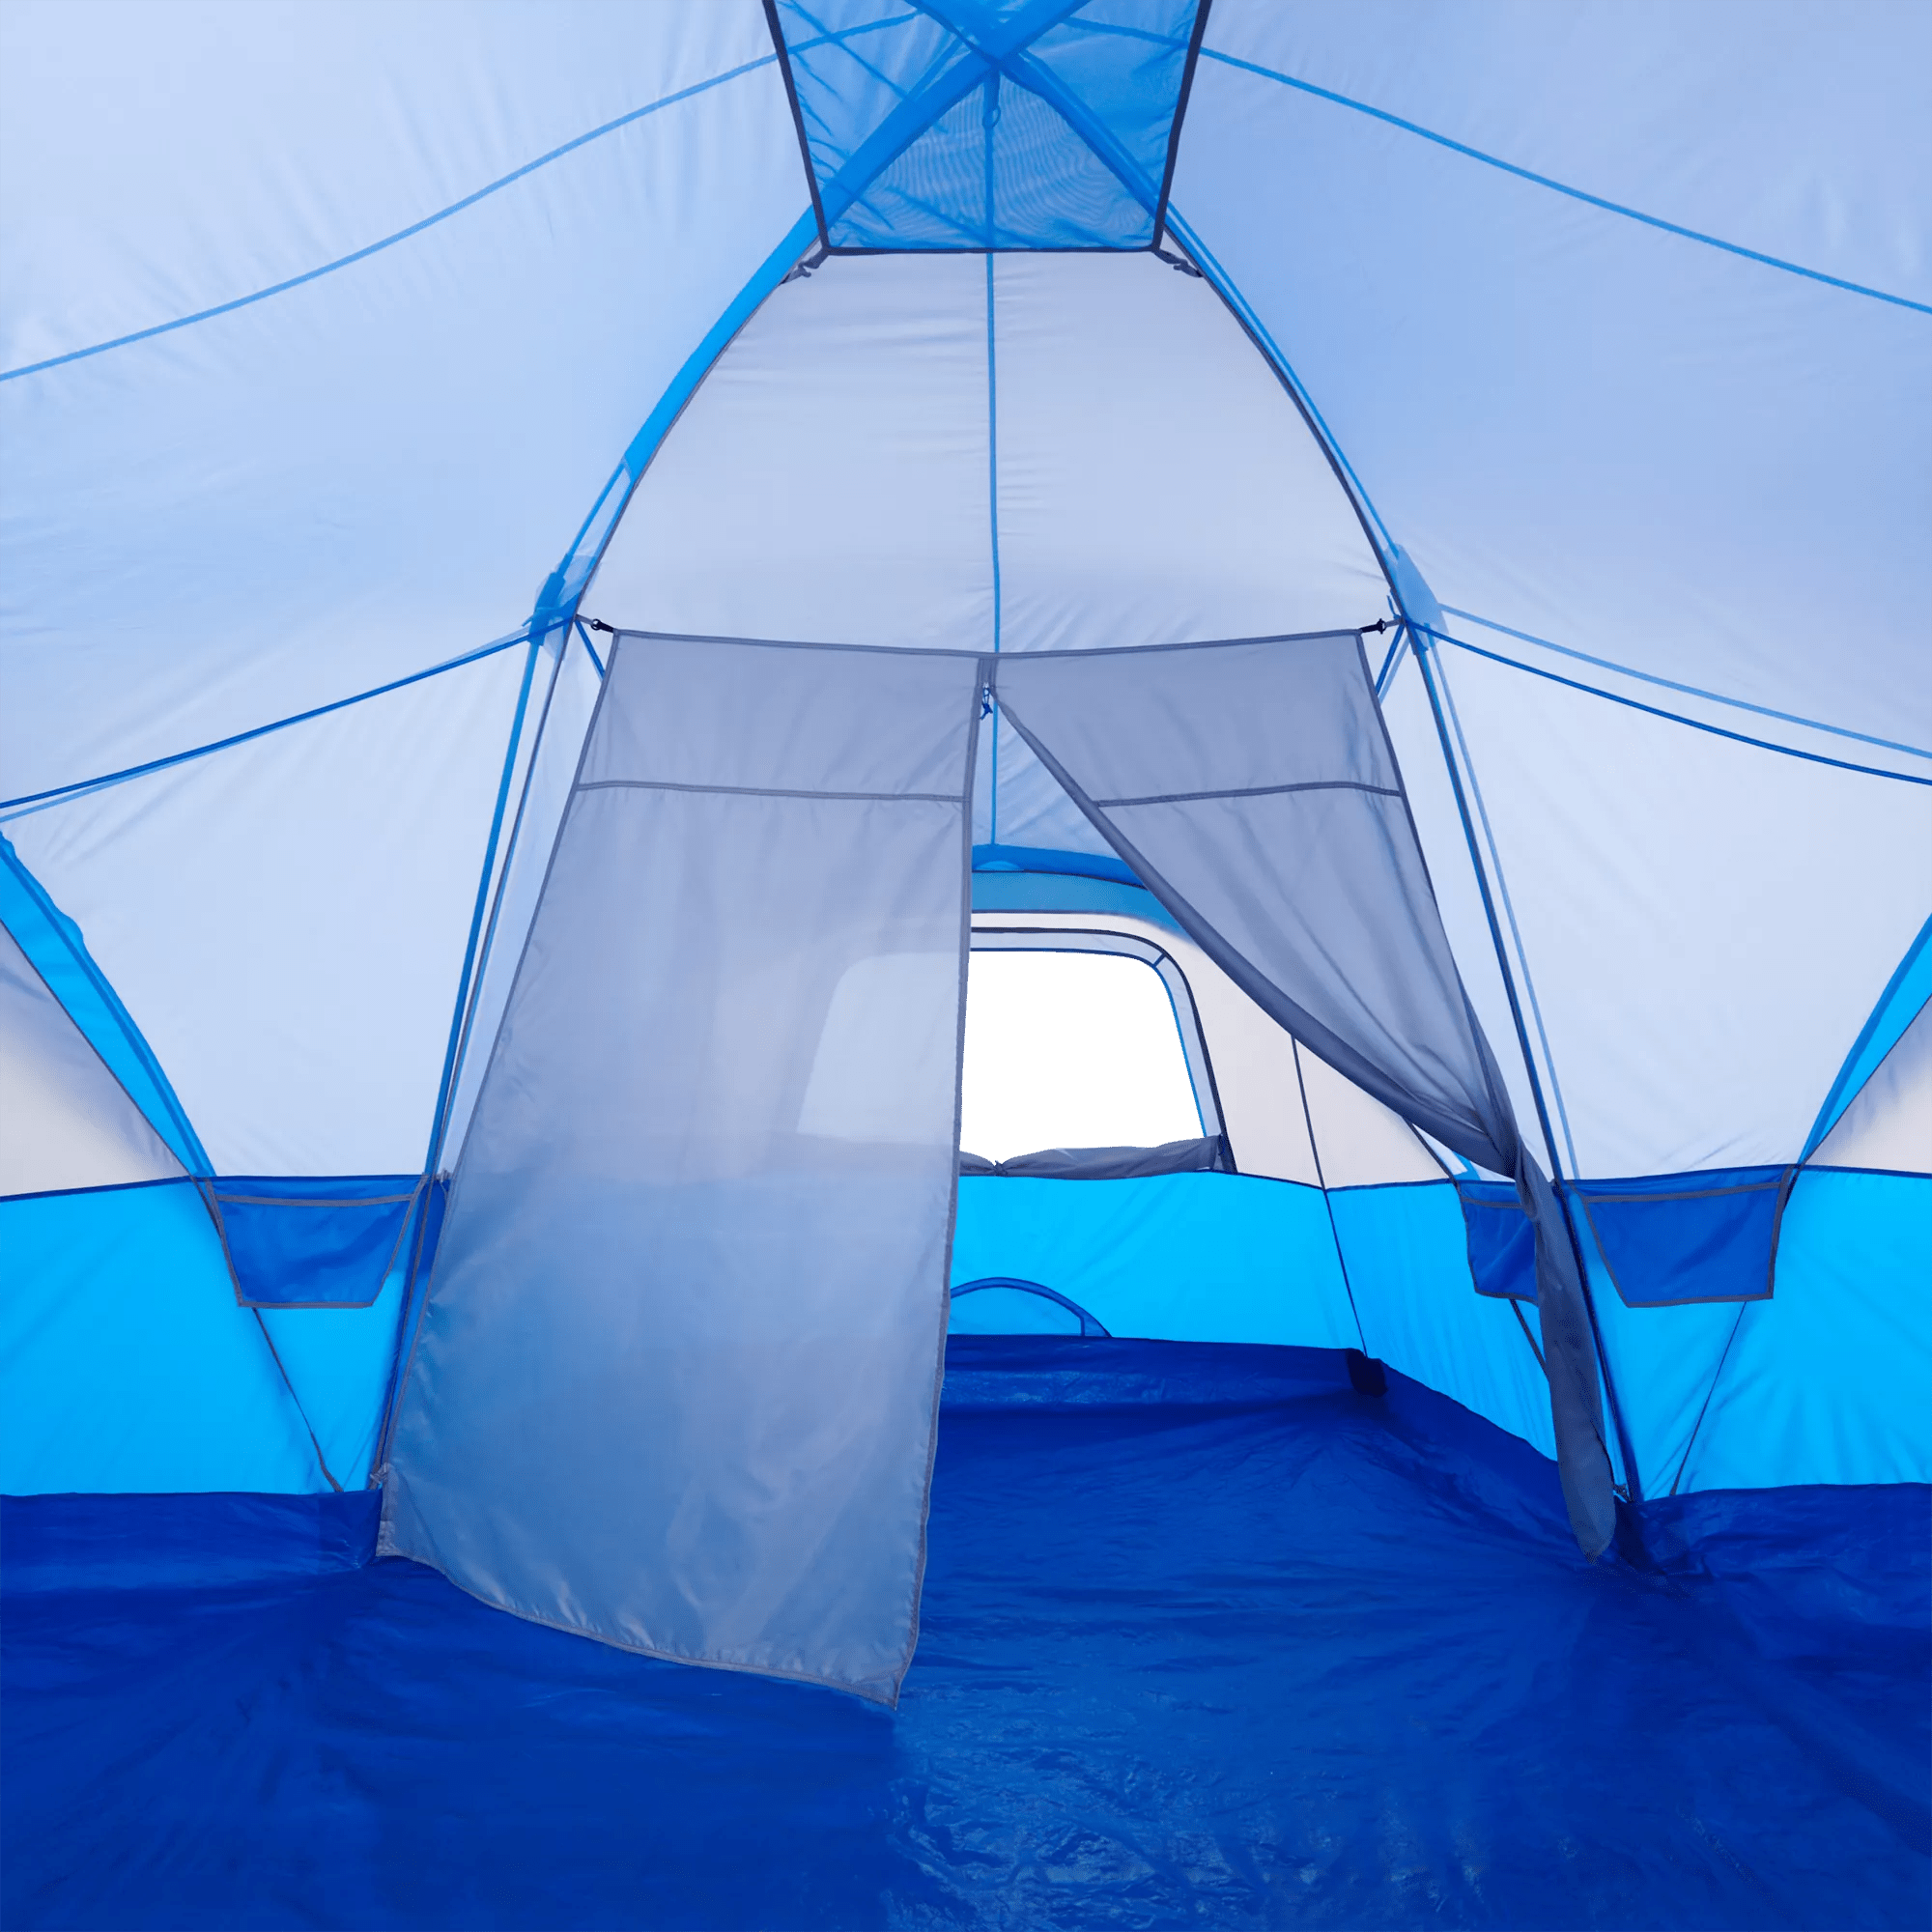 Olympic Dome 10 Multi-Room Tent